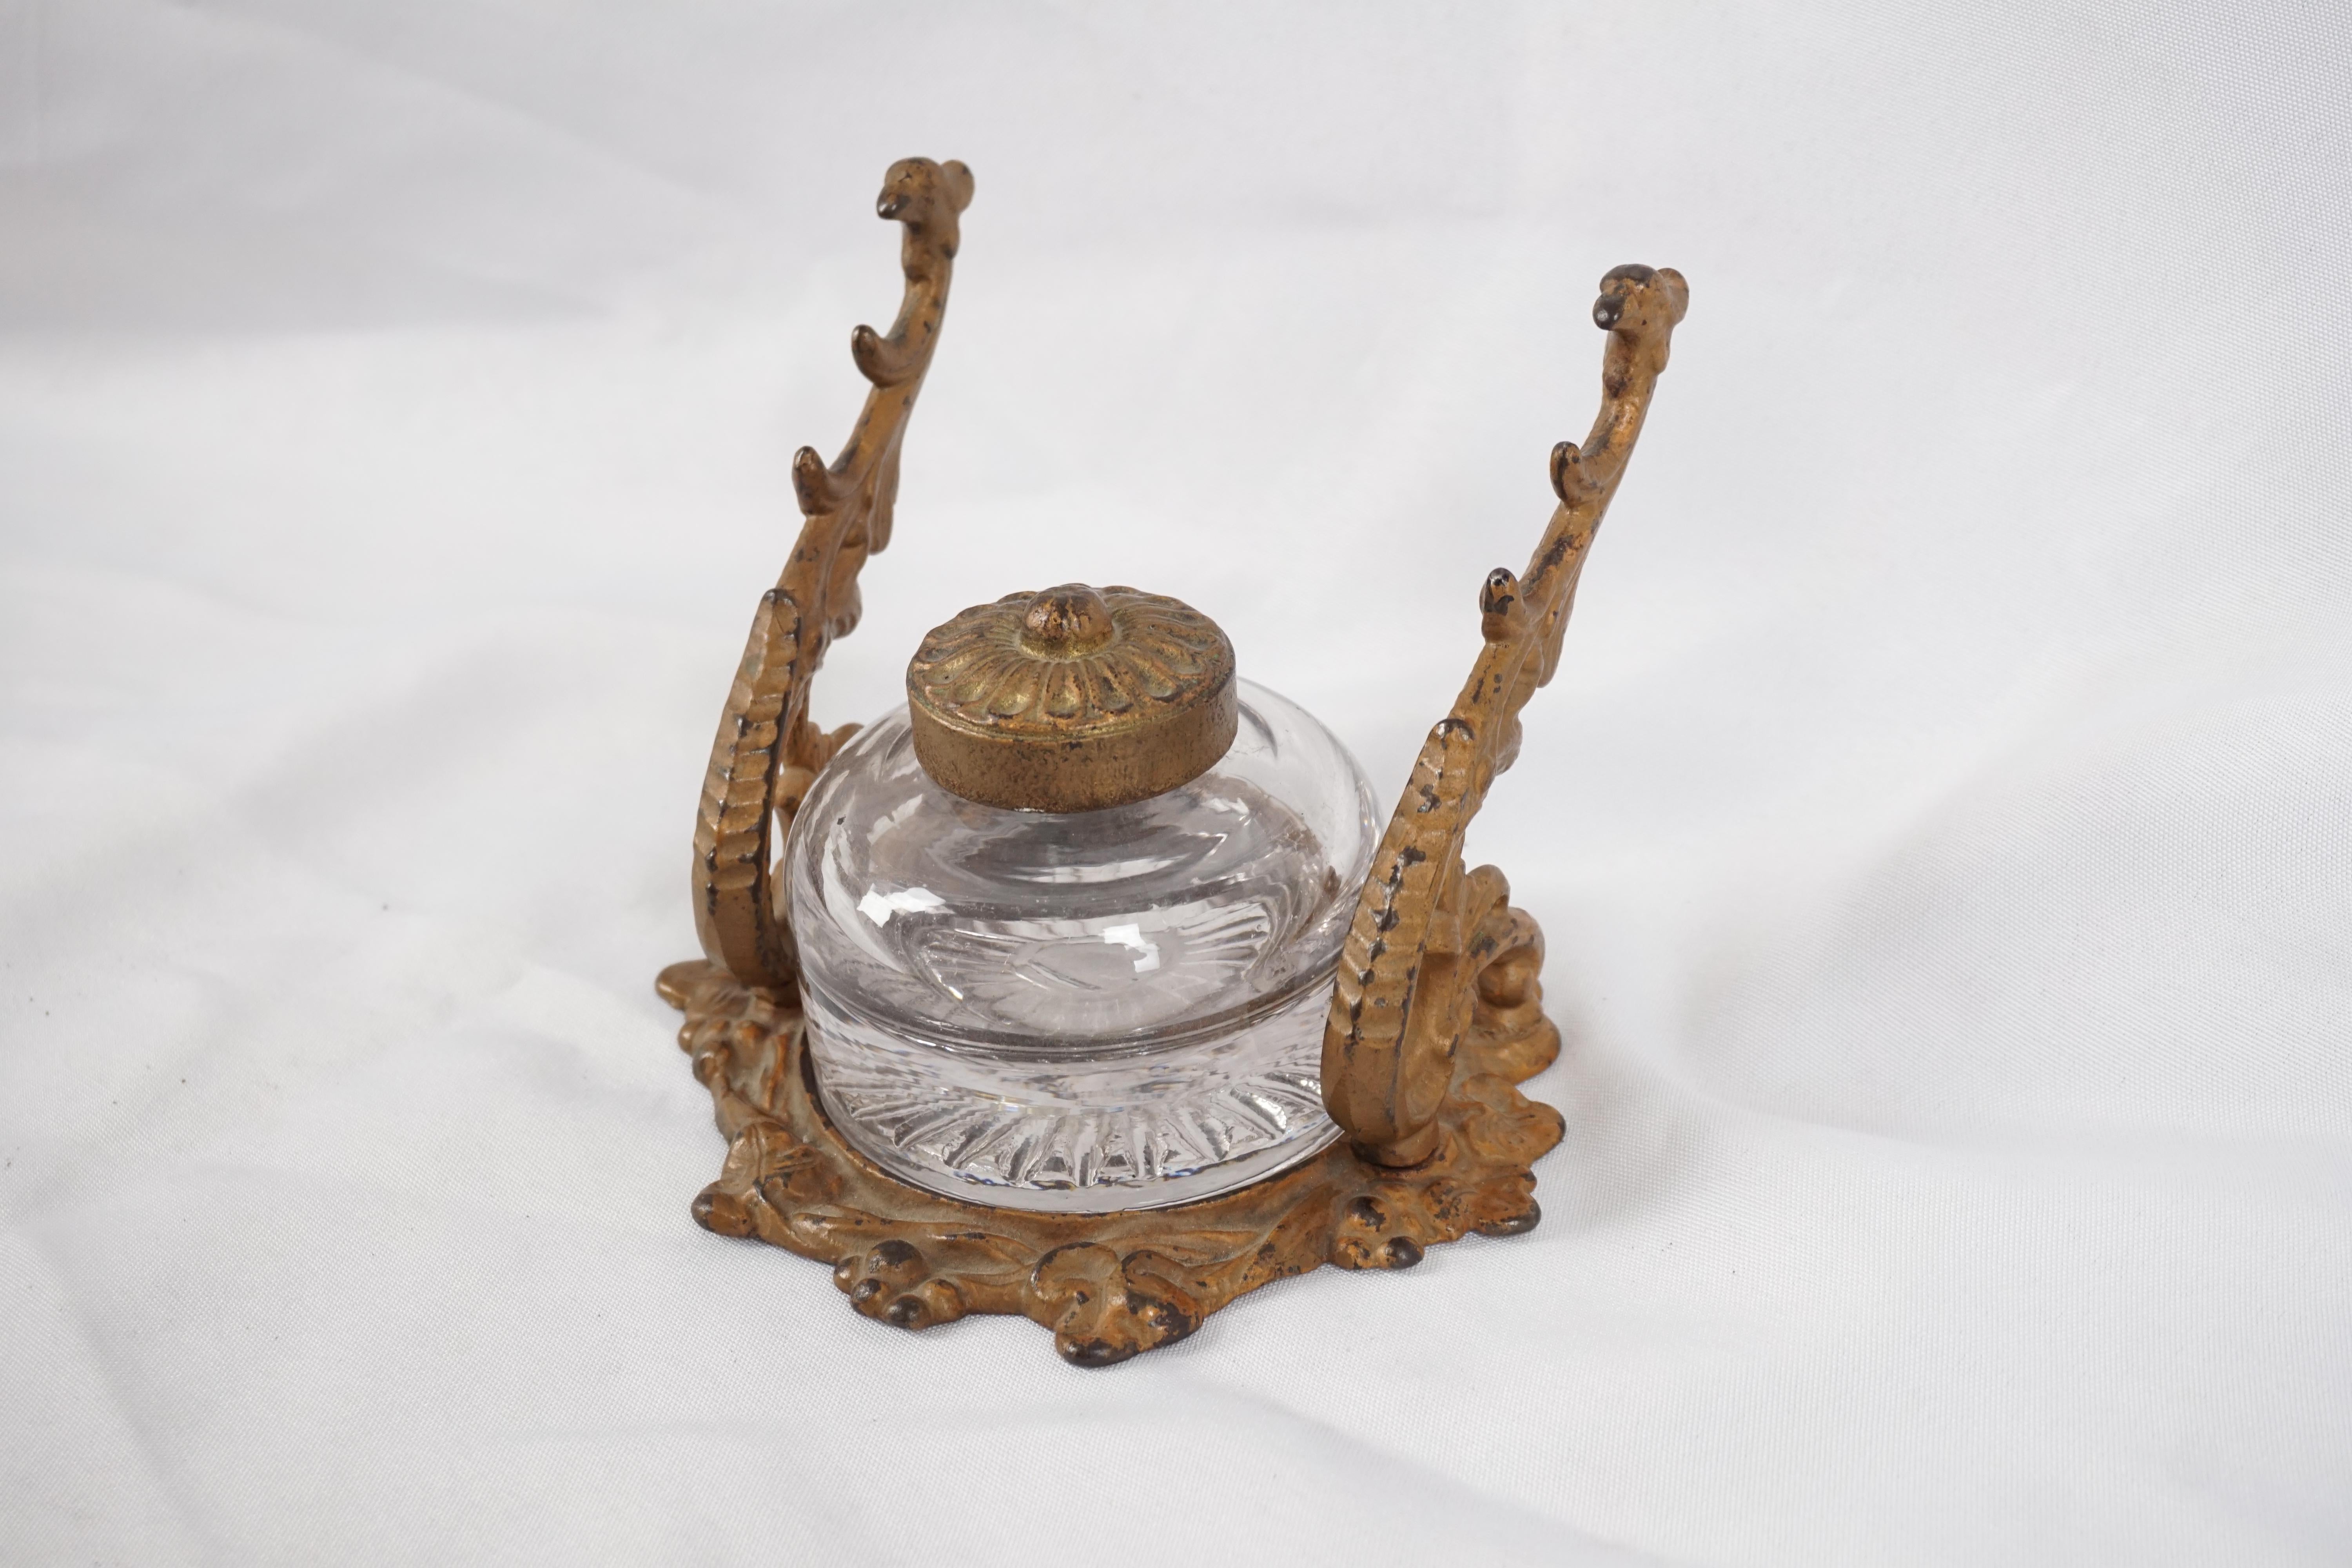 Antique bronze inkwell, Ormolu mounted inkstand, France 1890, H303

France 1890
Bronze
Bronze ormolu mounted inkstand
Pen rest to the sides
Brass inkwell with bronze cover
All sitting in a shaped base

H303

Measures: 5.5